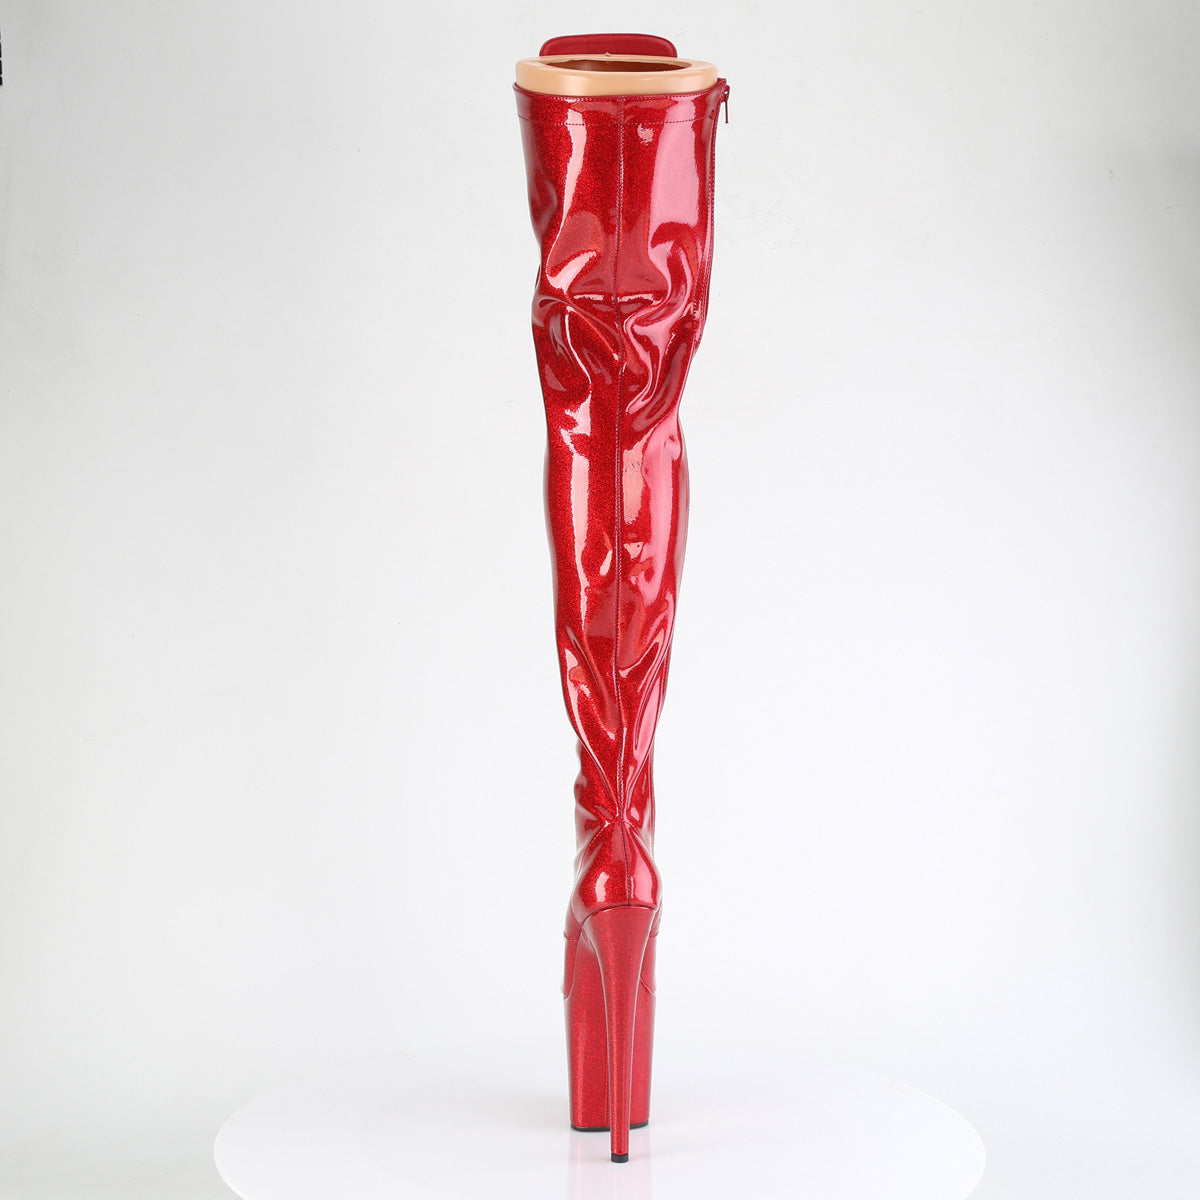 FLAMINGO-3020GP Pleaser Red Exotic Dancing Thigh High boots